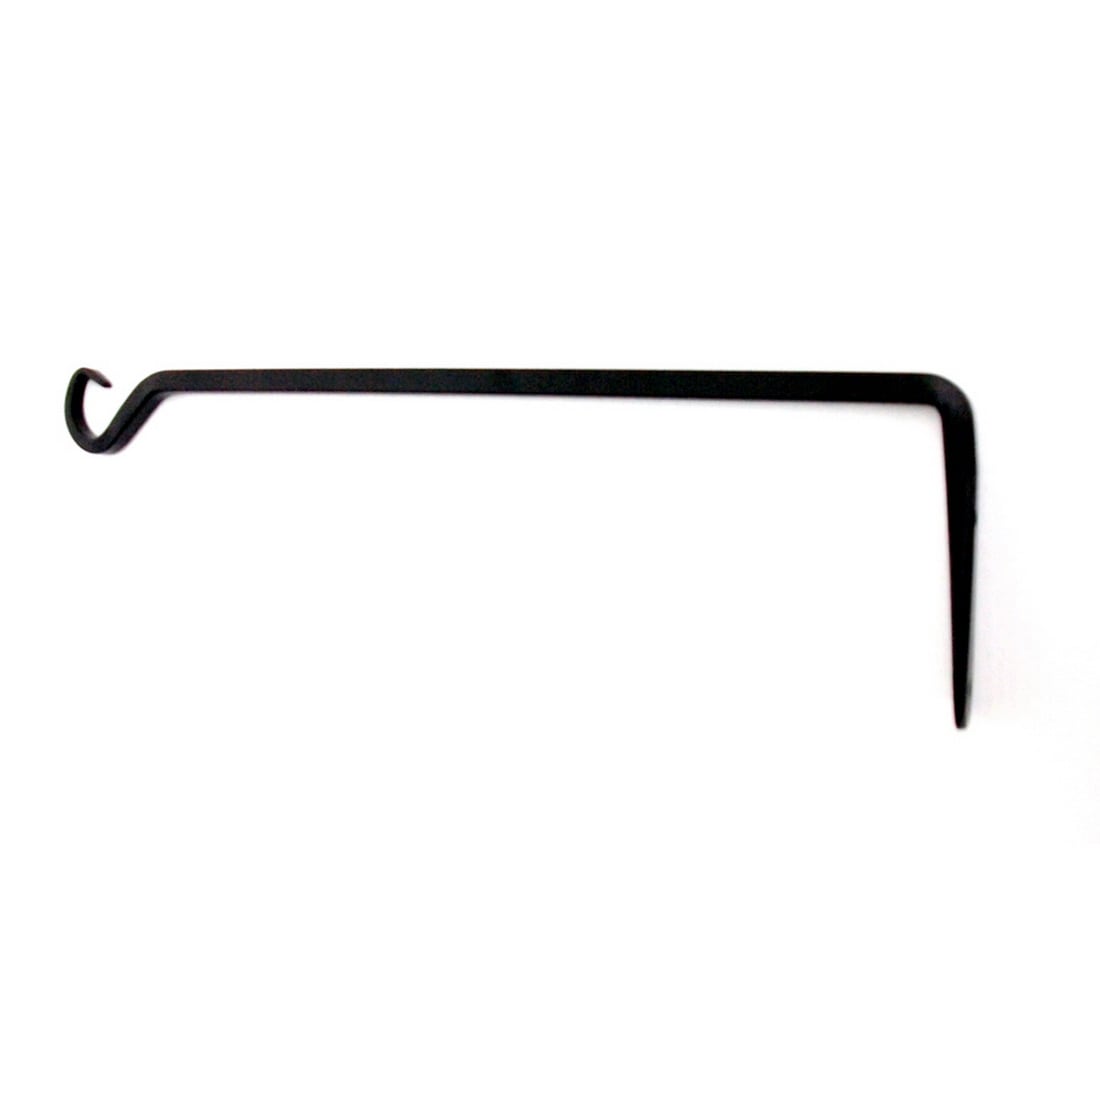 Indoor/Outdoor Plant Hooks at